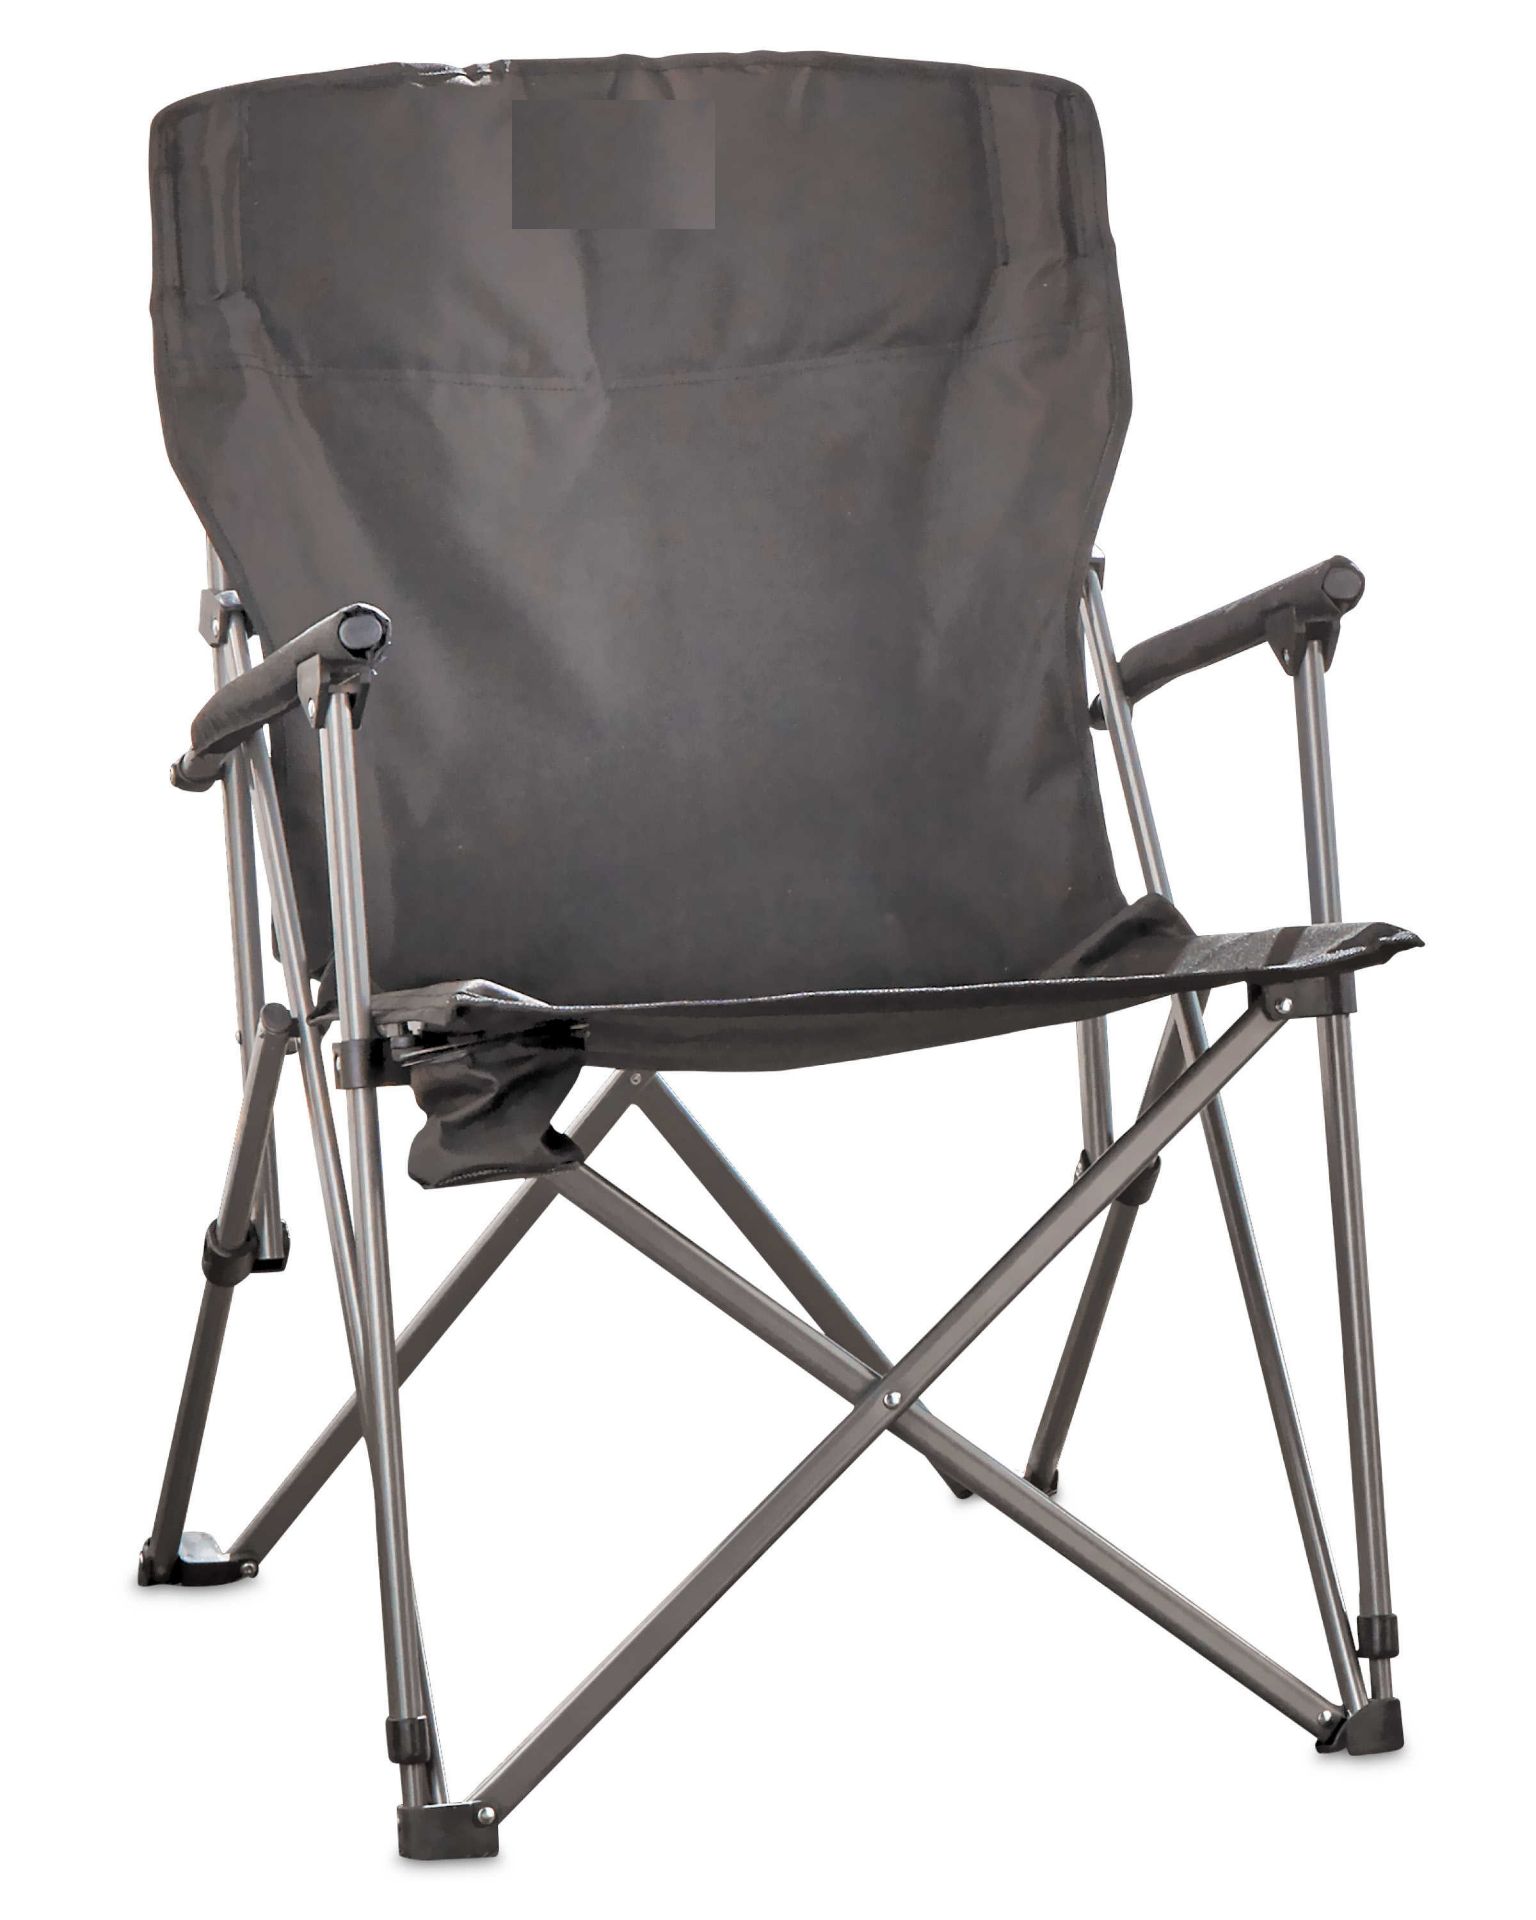 V Brand New Tourer/Expedition Chair In Silver/Black With Carry Case - Lightweight Steel Frame So